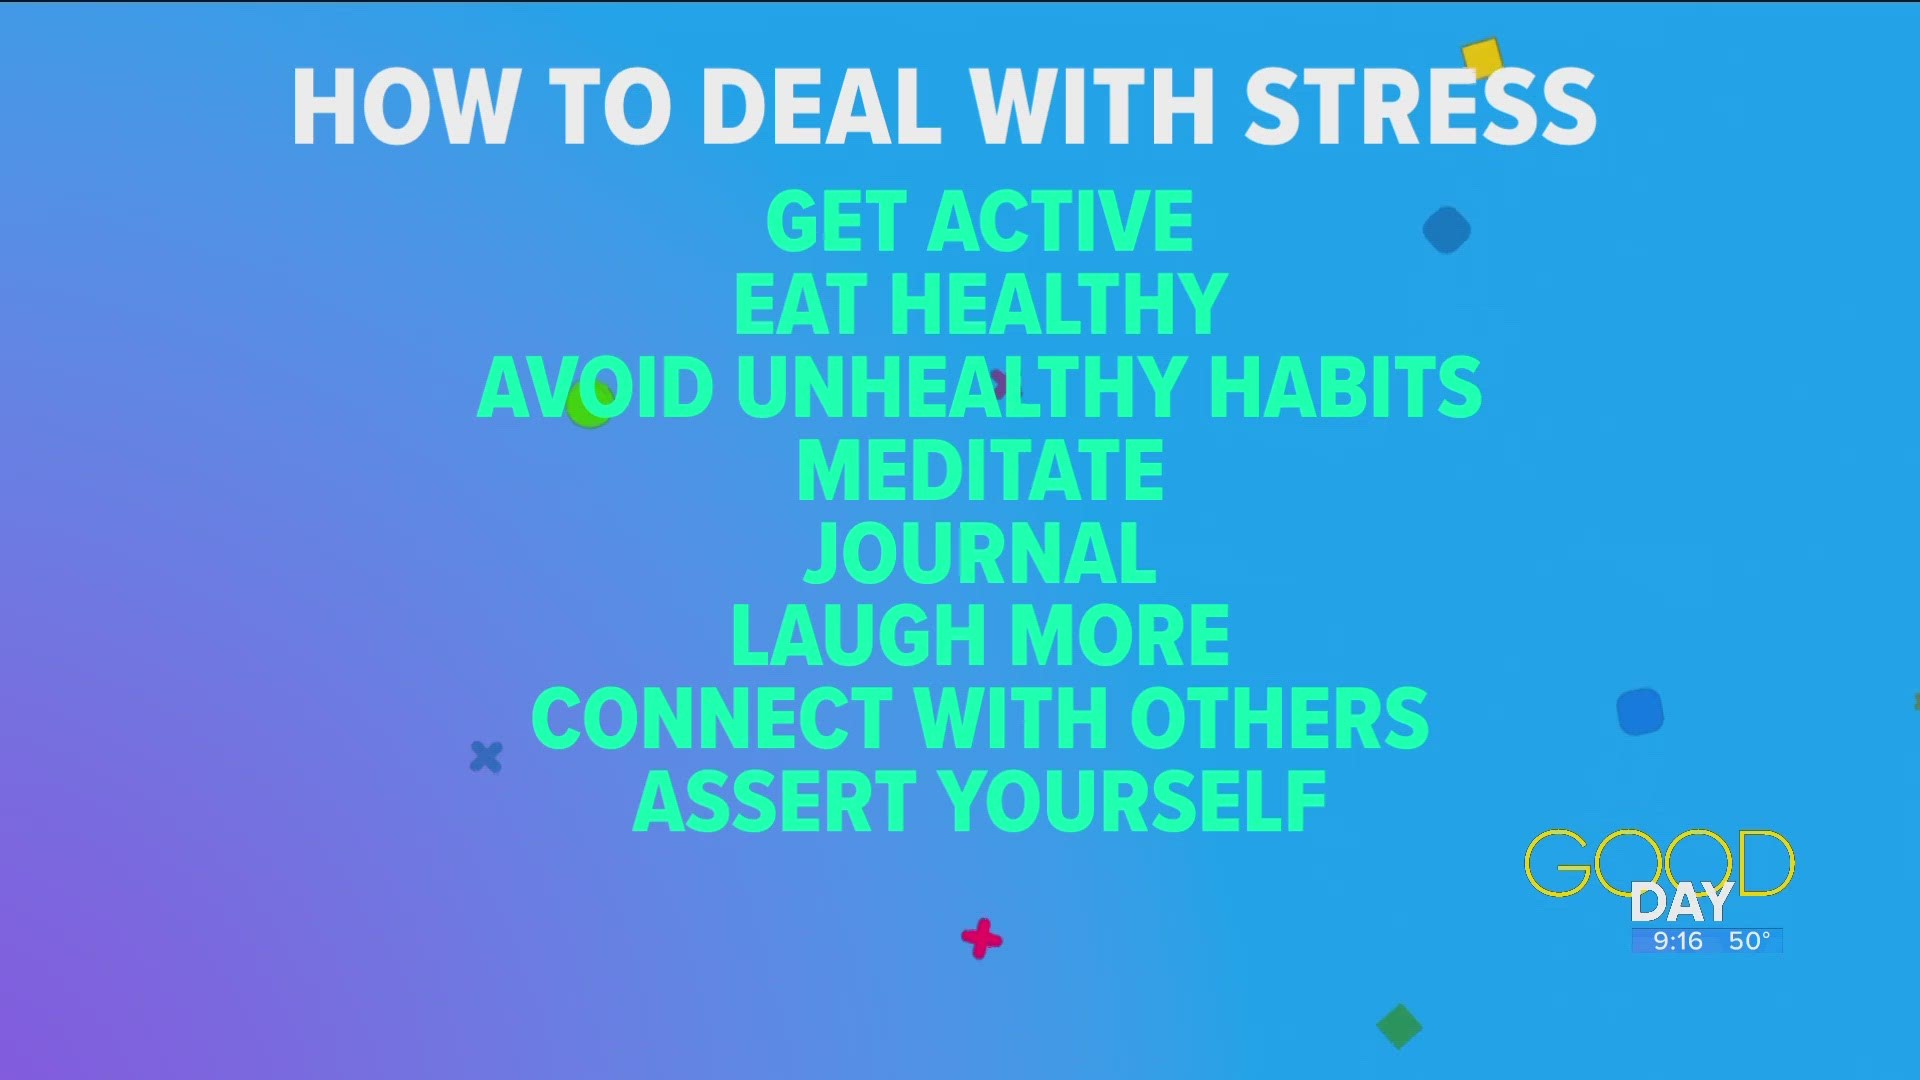 Sarah Berendt of the Thomas M Wernert Center offers some tips on how to face stress during Mental Health Awareness Month.